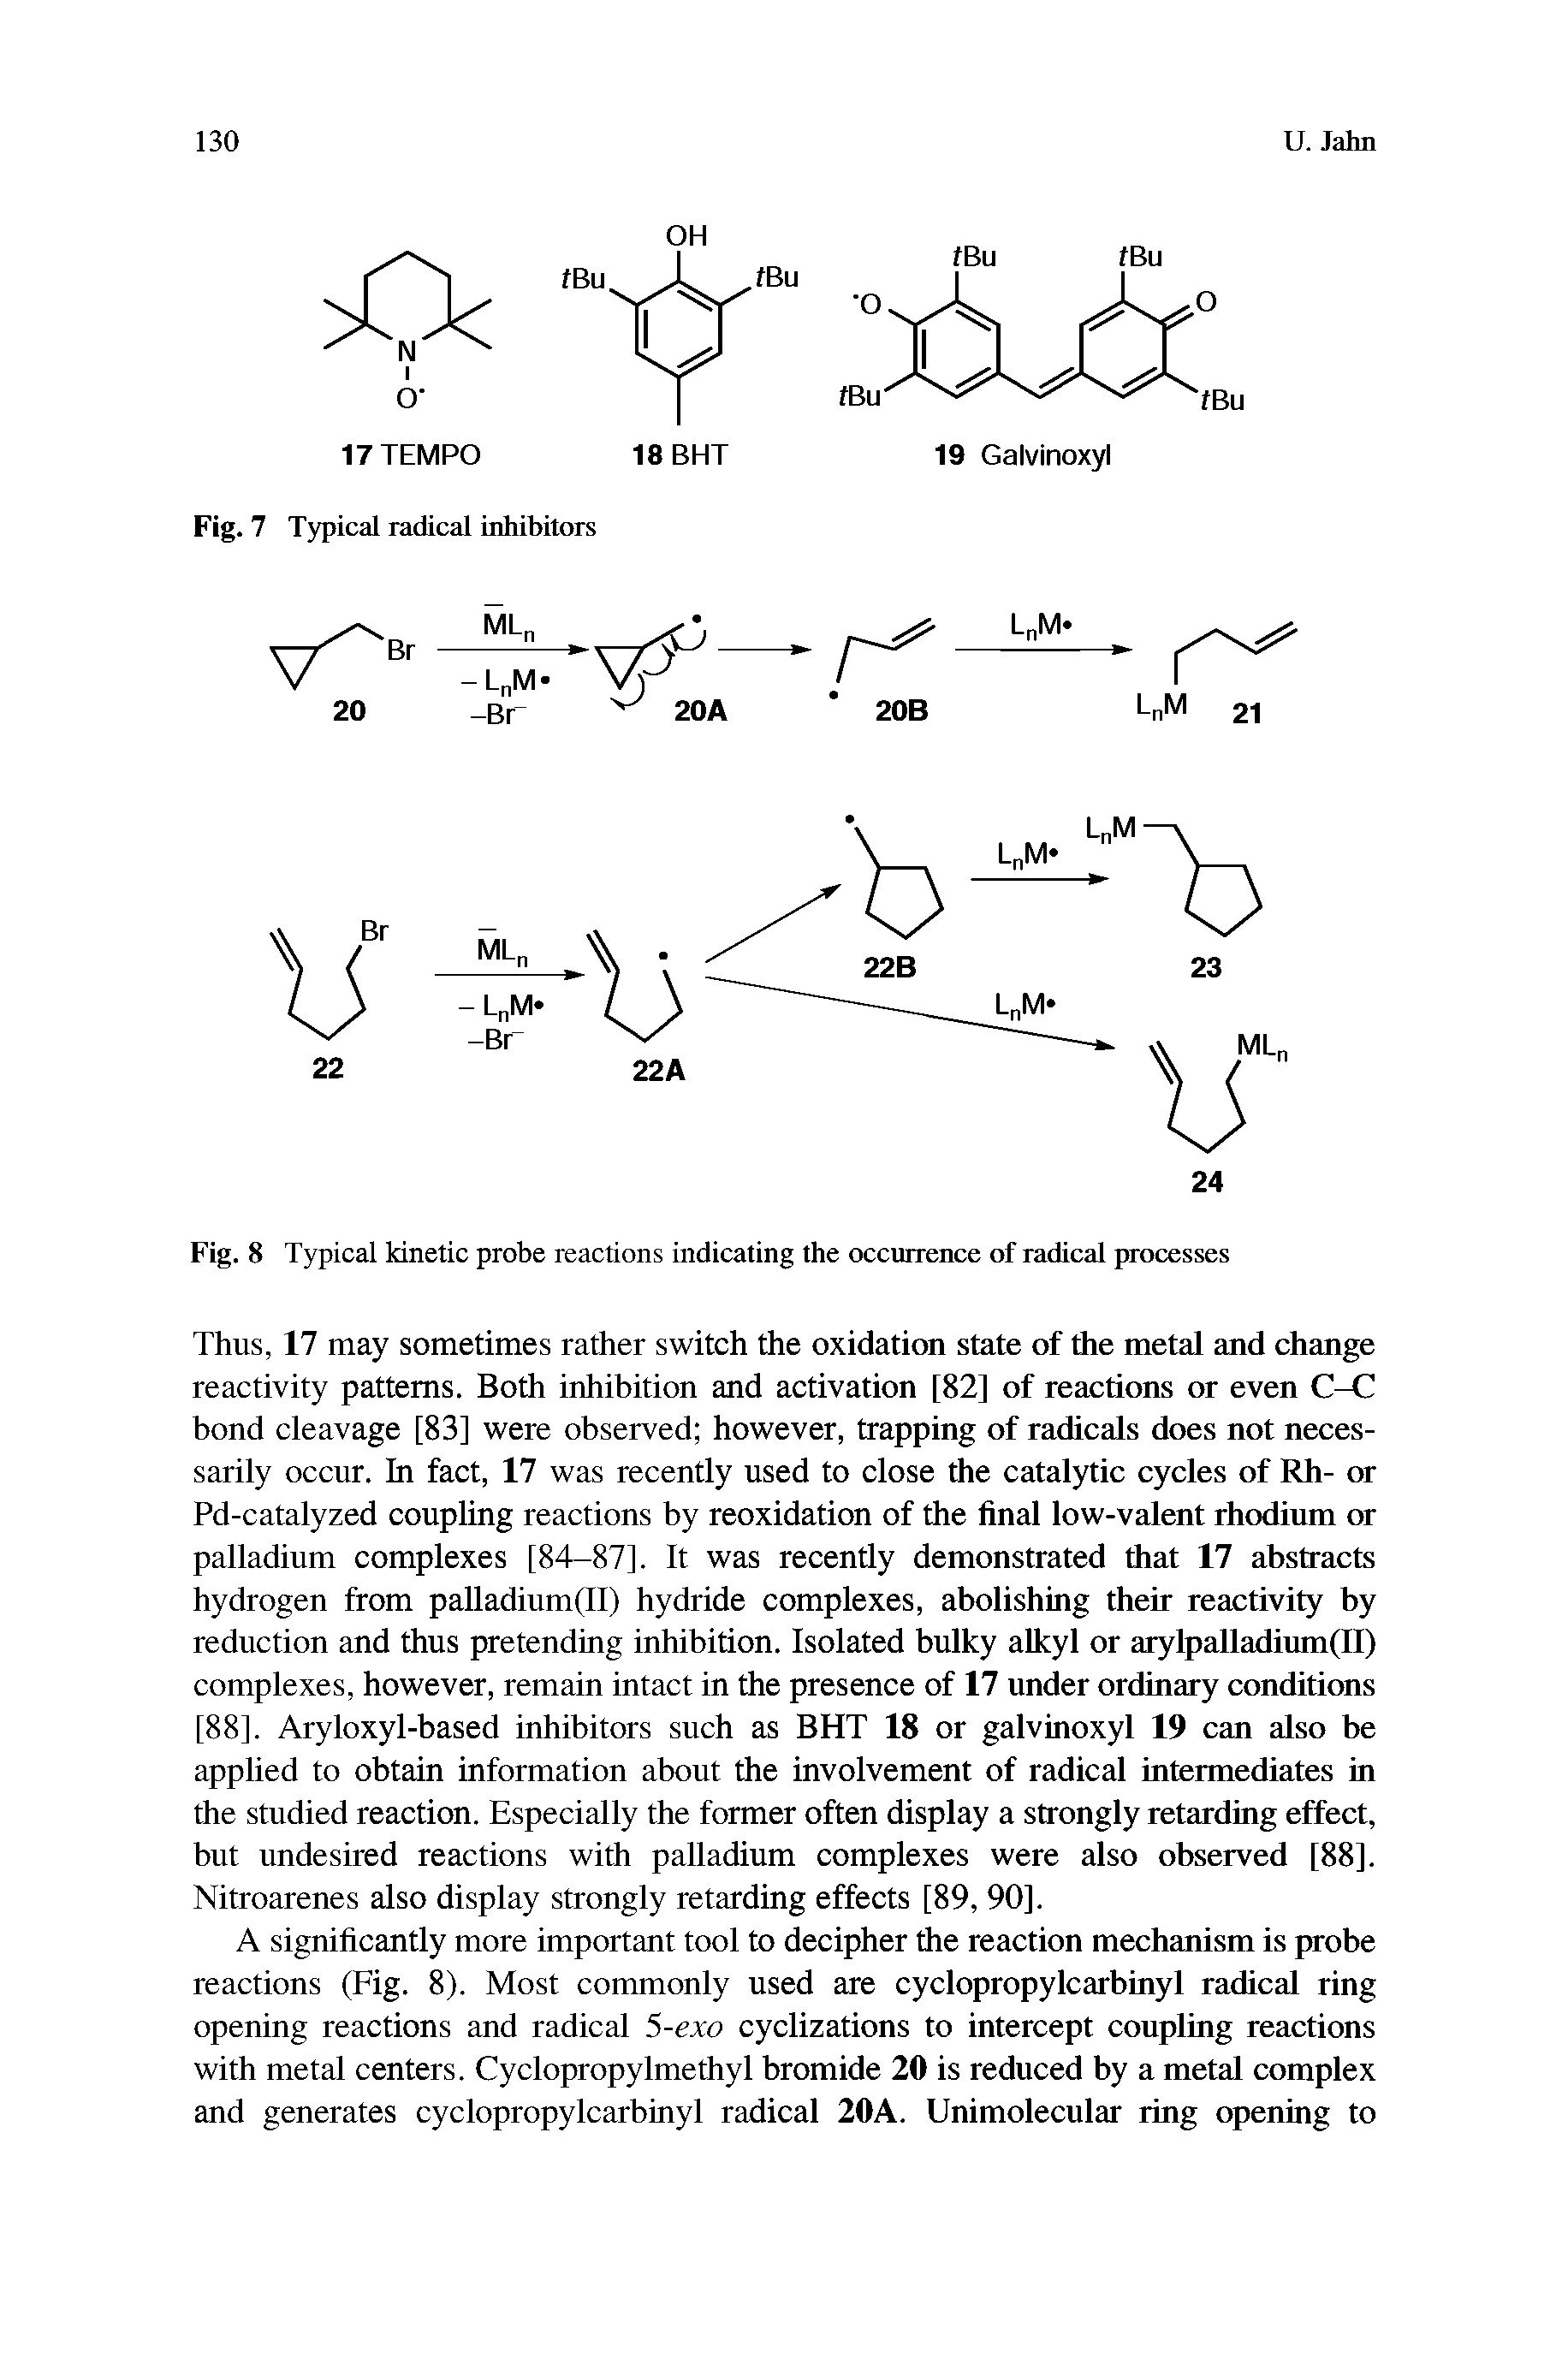 Fig. 8 Typical kinetic probe reactions indicating the occurrence of radical processes...